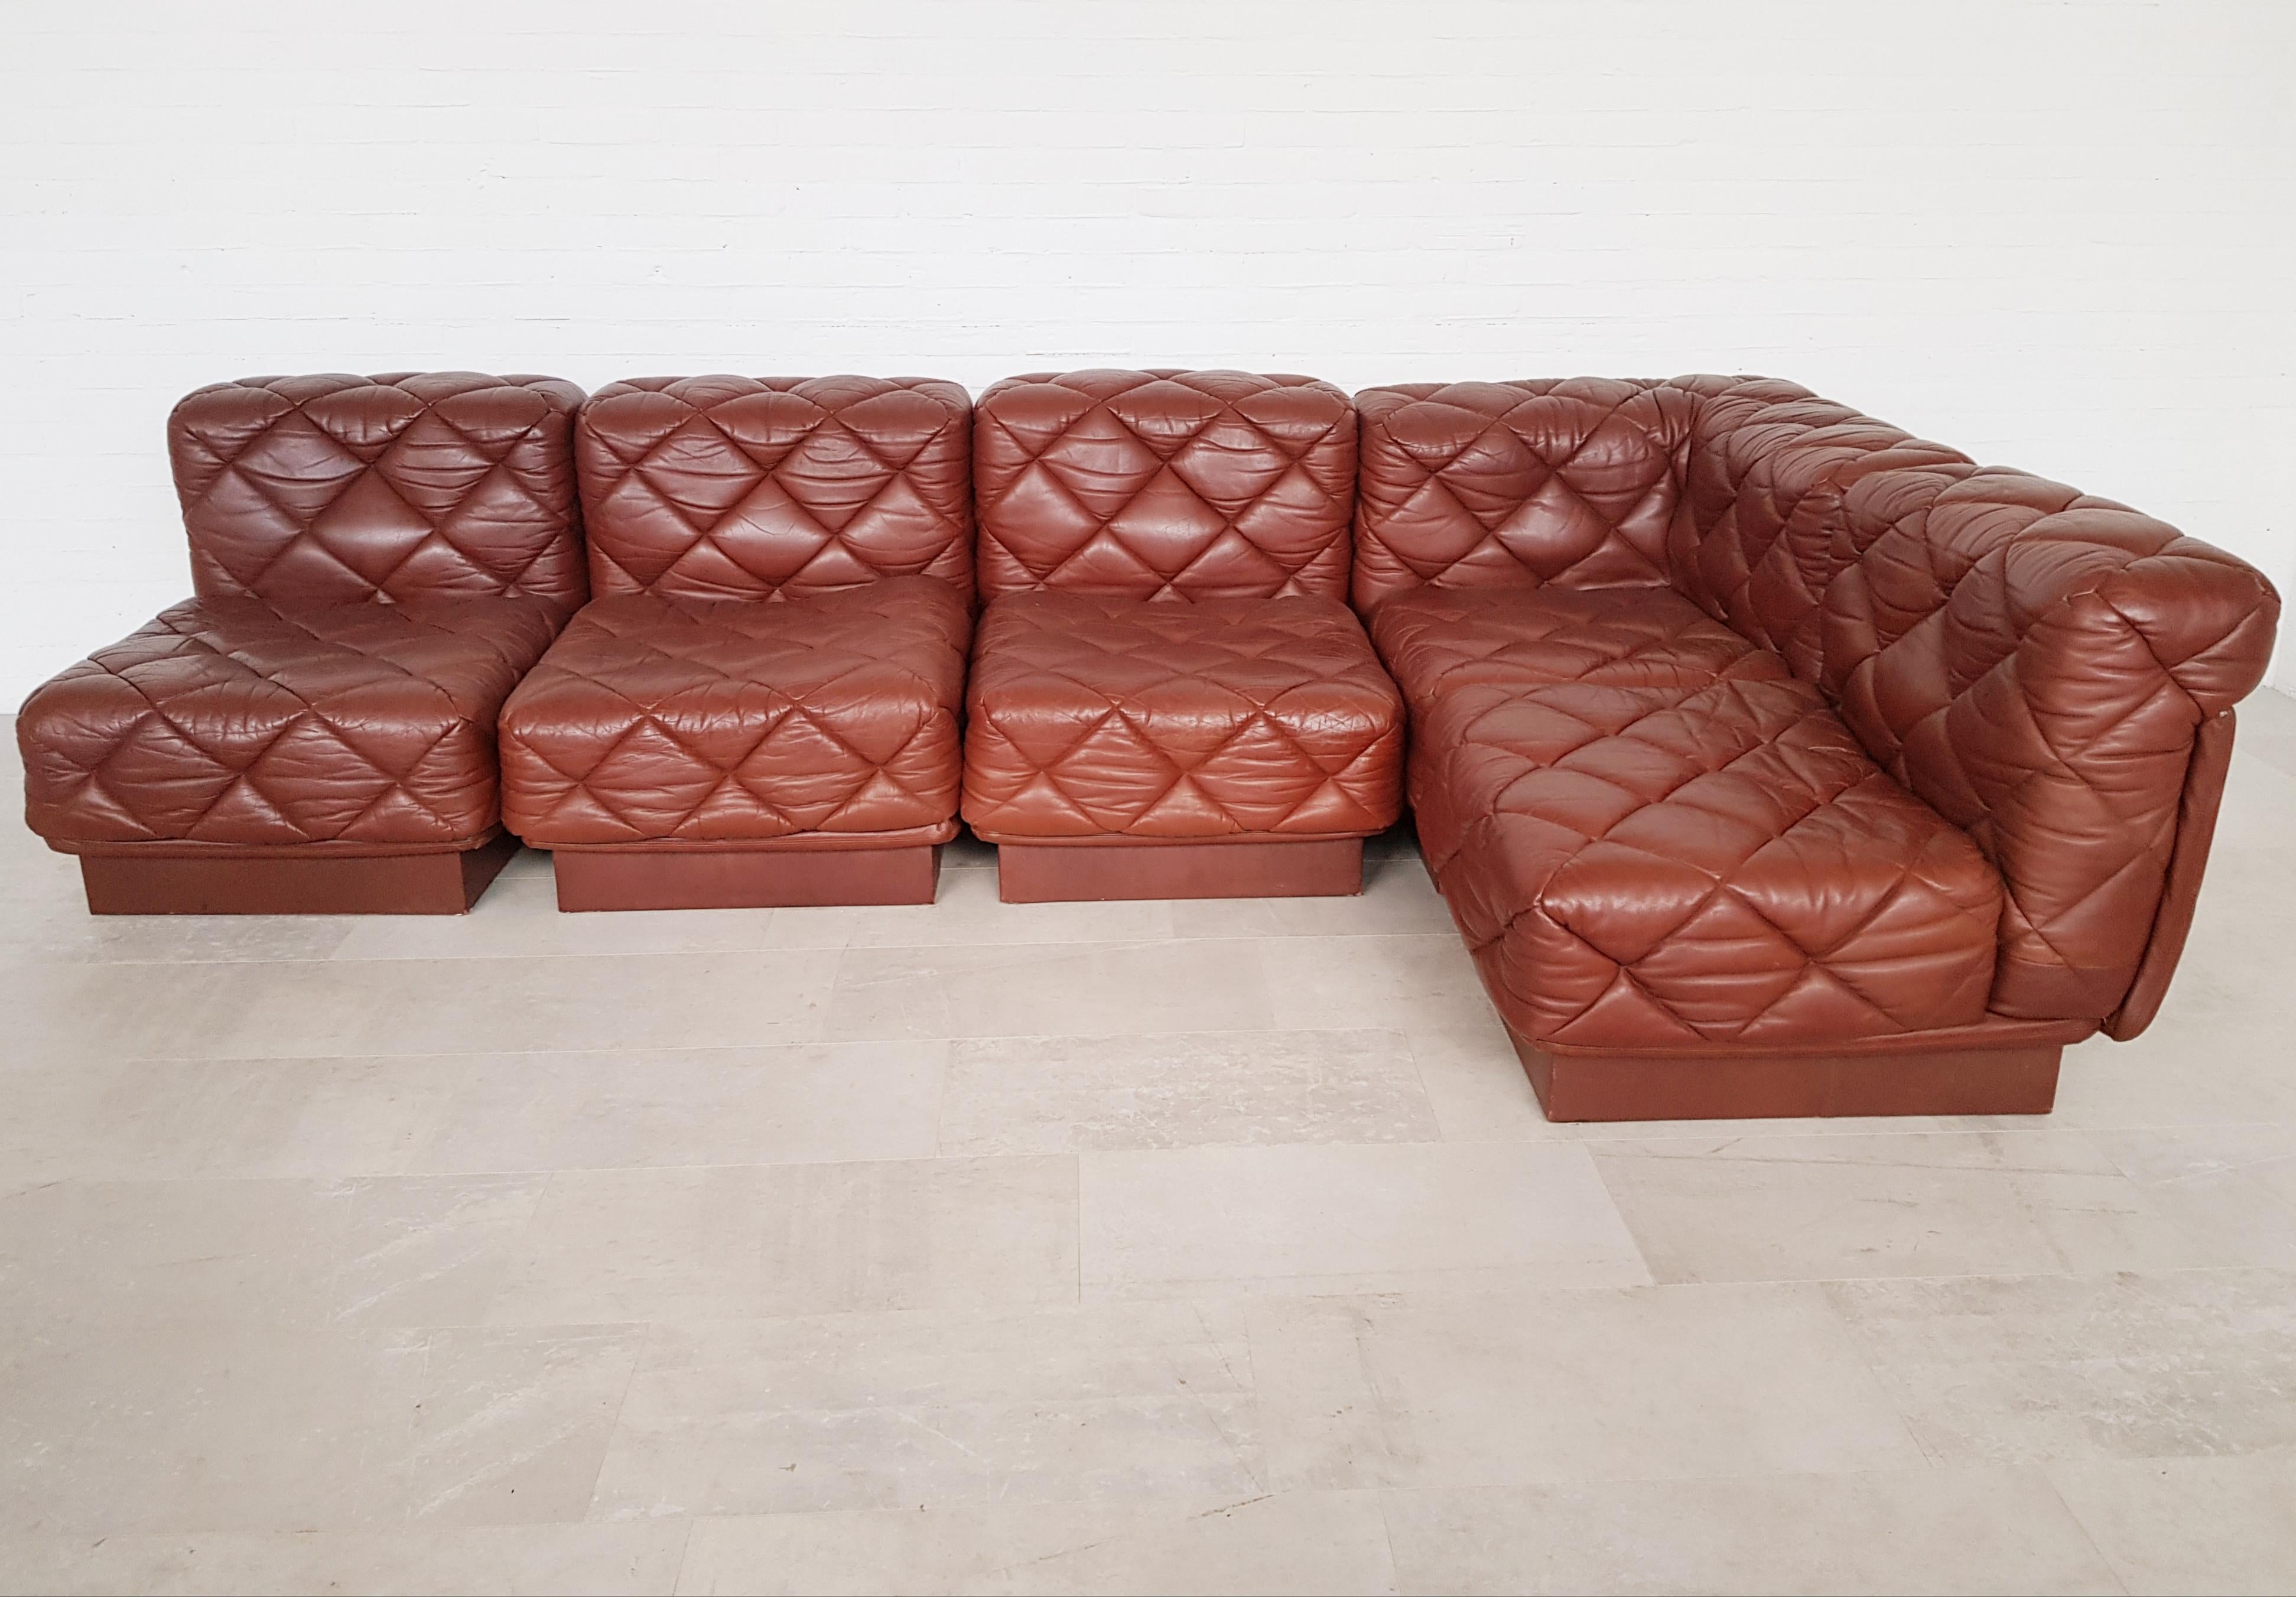 20th Century Wittman Sectional Sofa in Brown Patchwork Leather